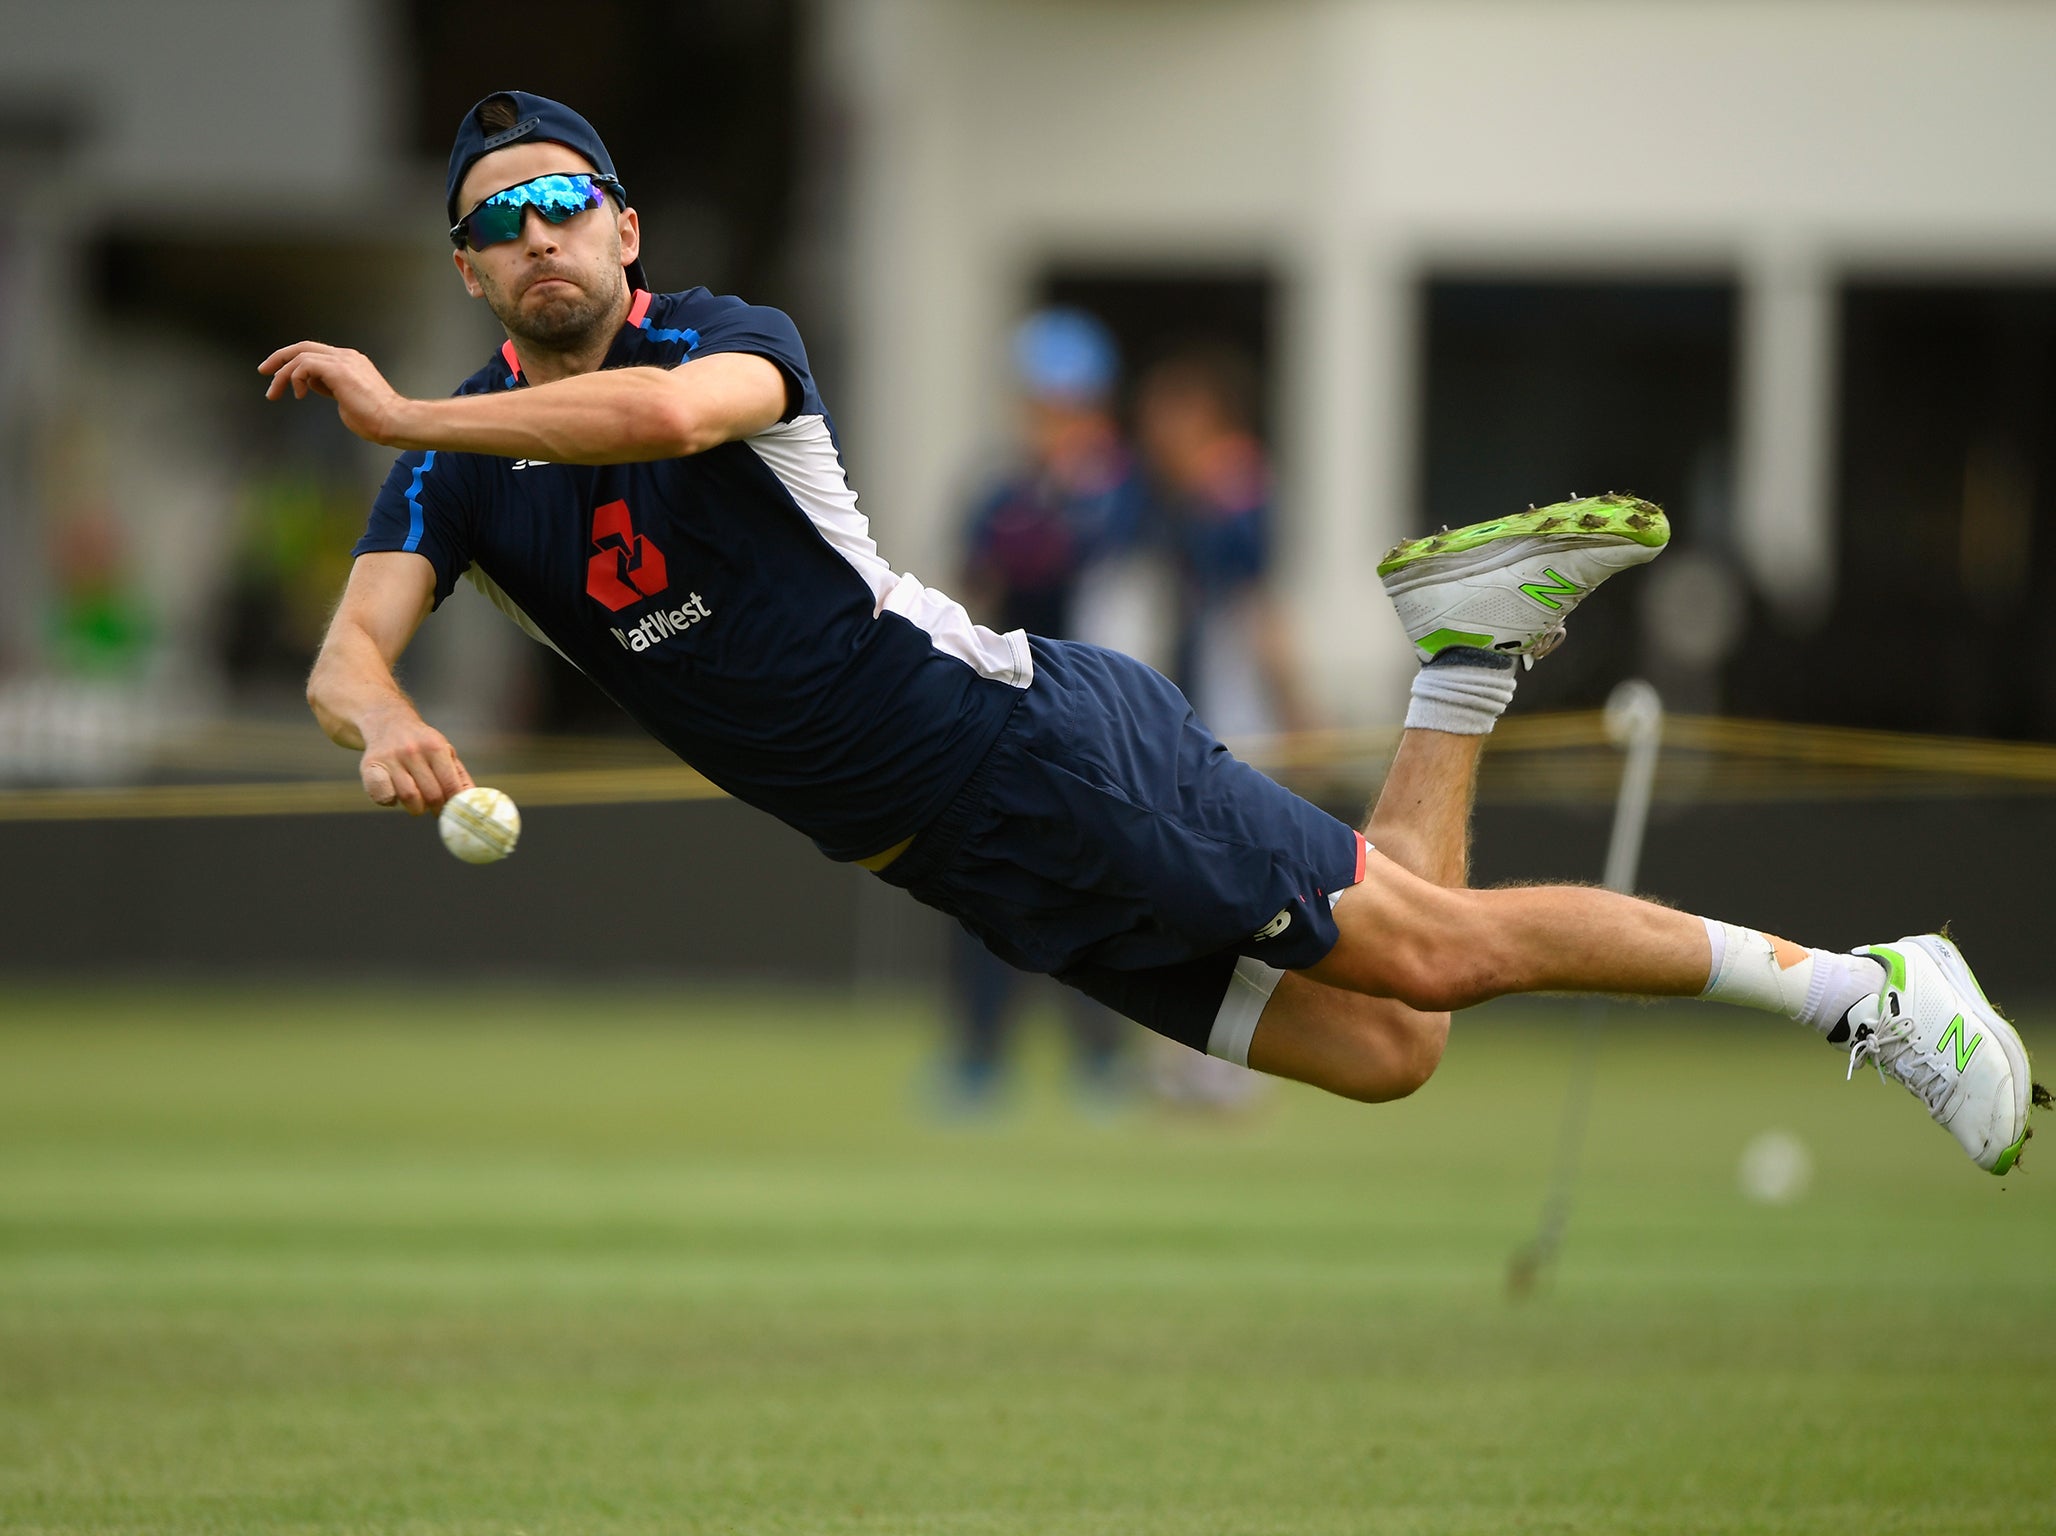 Mark Wood has previously undergone three operations on his ankle